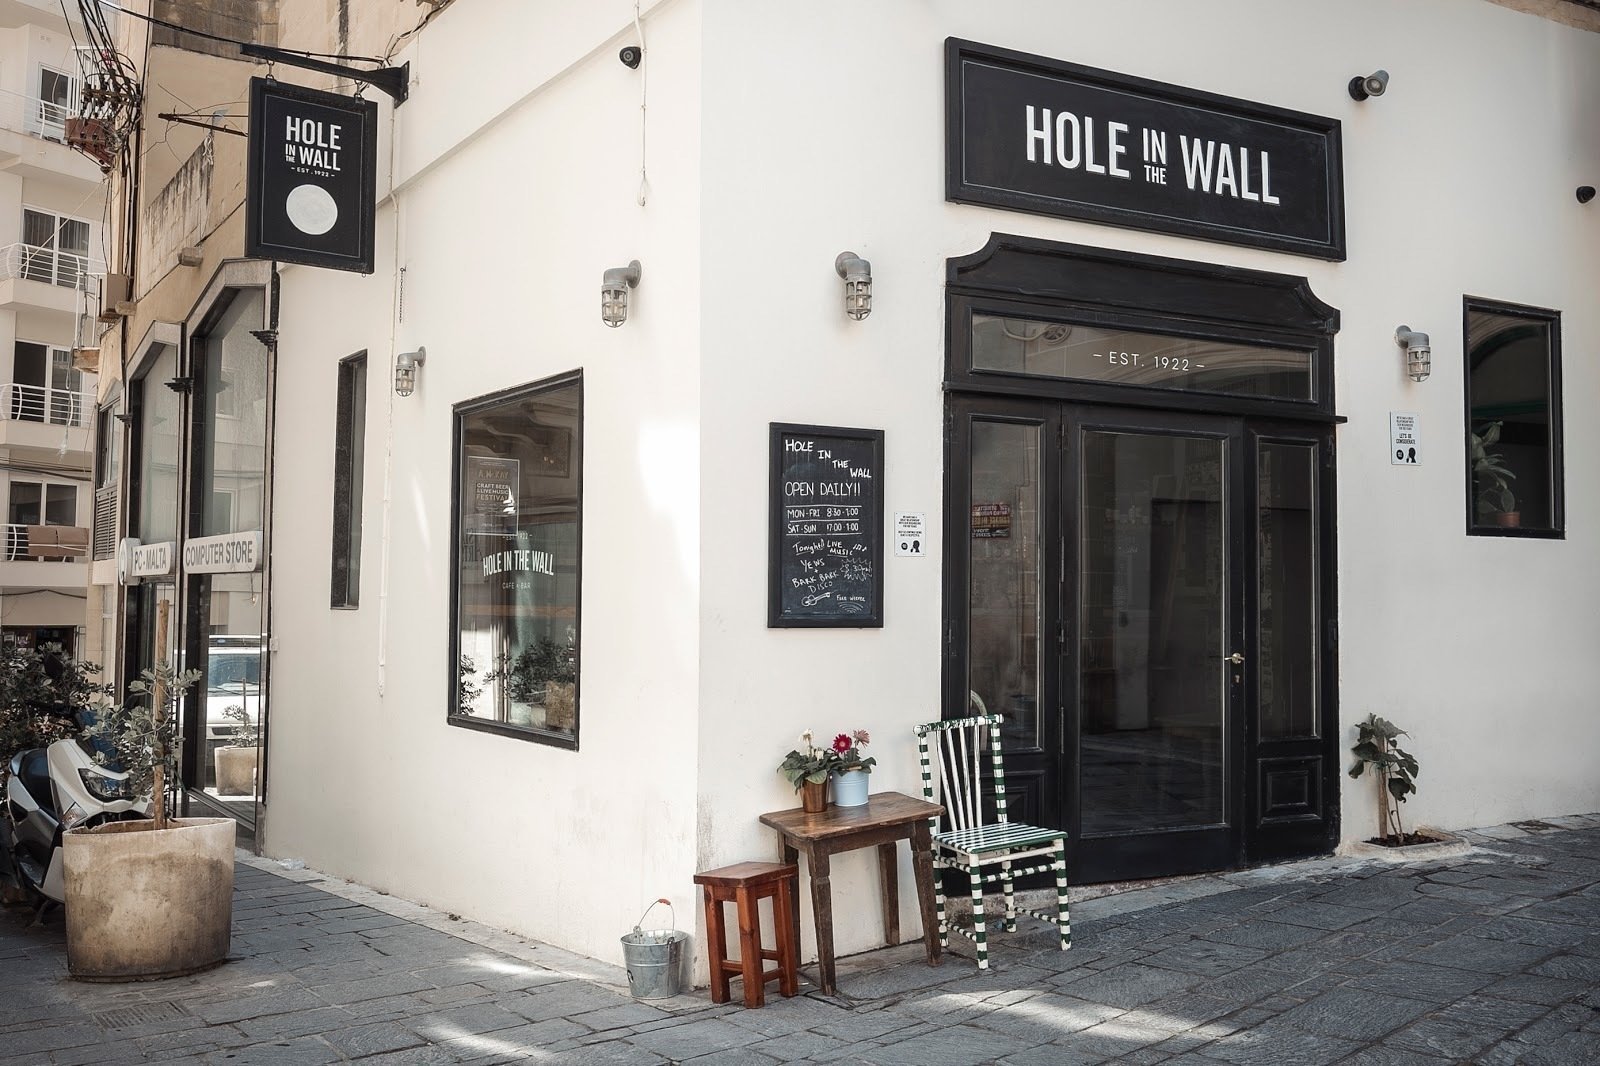 <span class="translation_missing" title="translation missing: en.meta.location_title, location_name: Hole in the Wall Bar &amp; Cafe, city: Malta">Location Title</span>